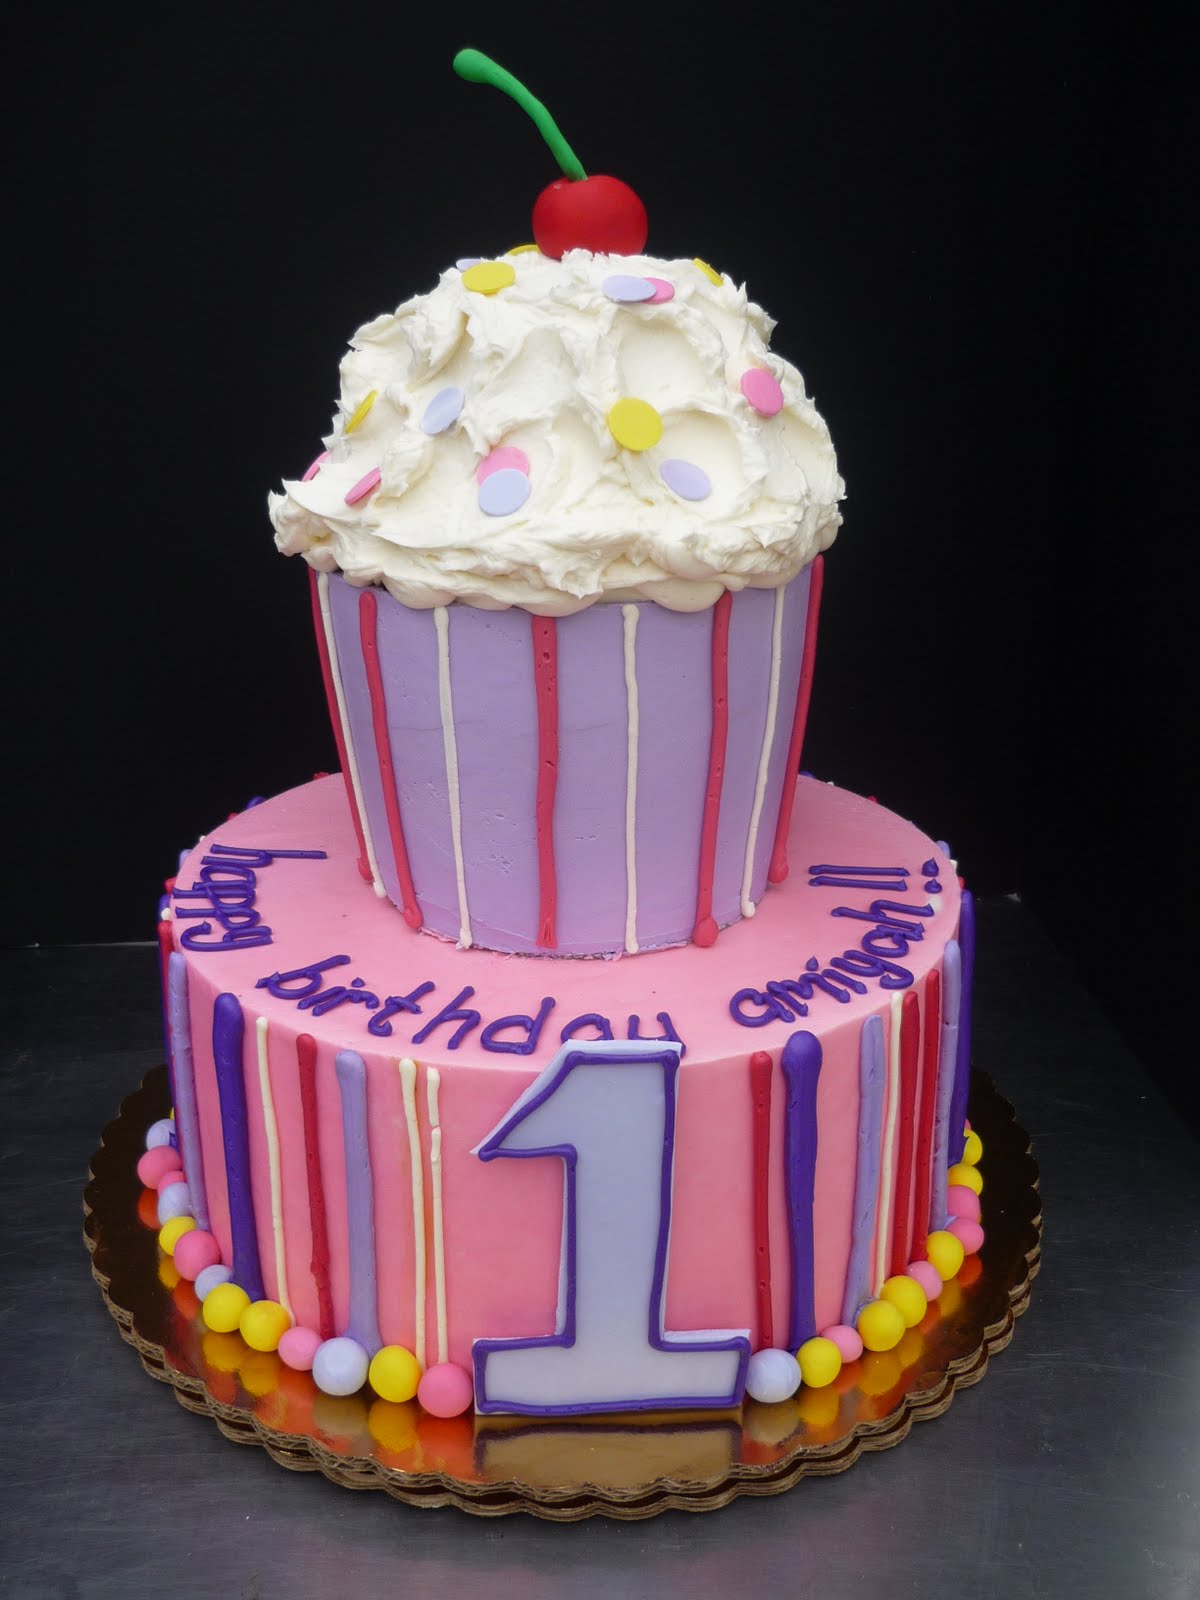 Giant Cupcake Cake for a First Birthday - Around the World in 80 Cakes